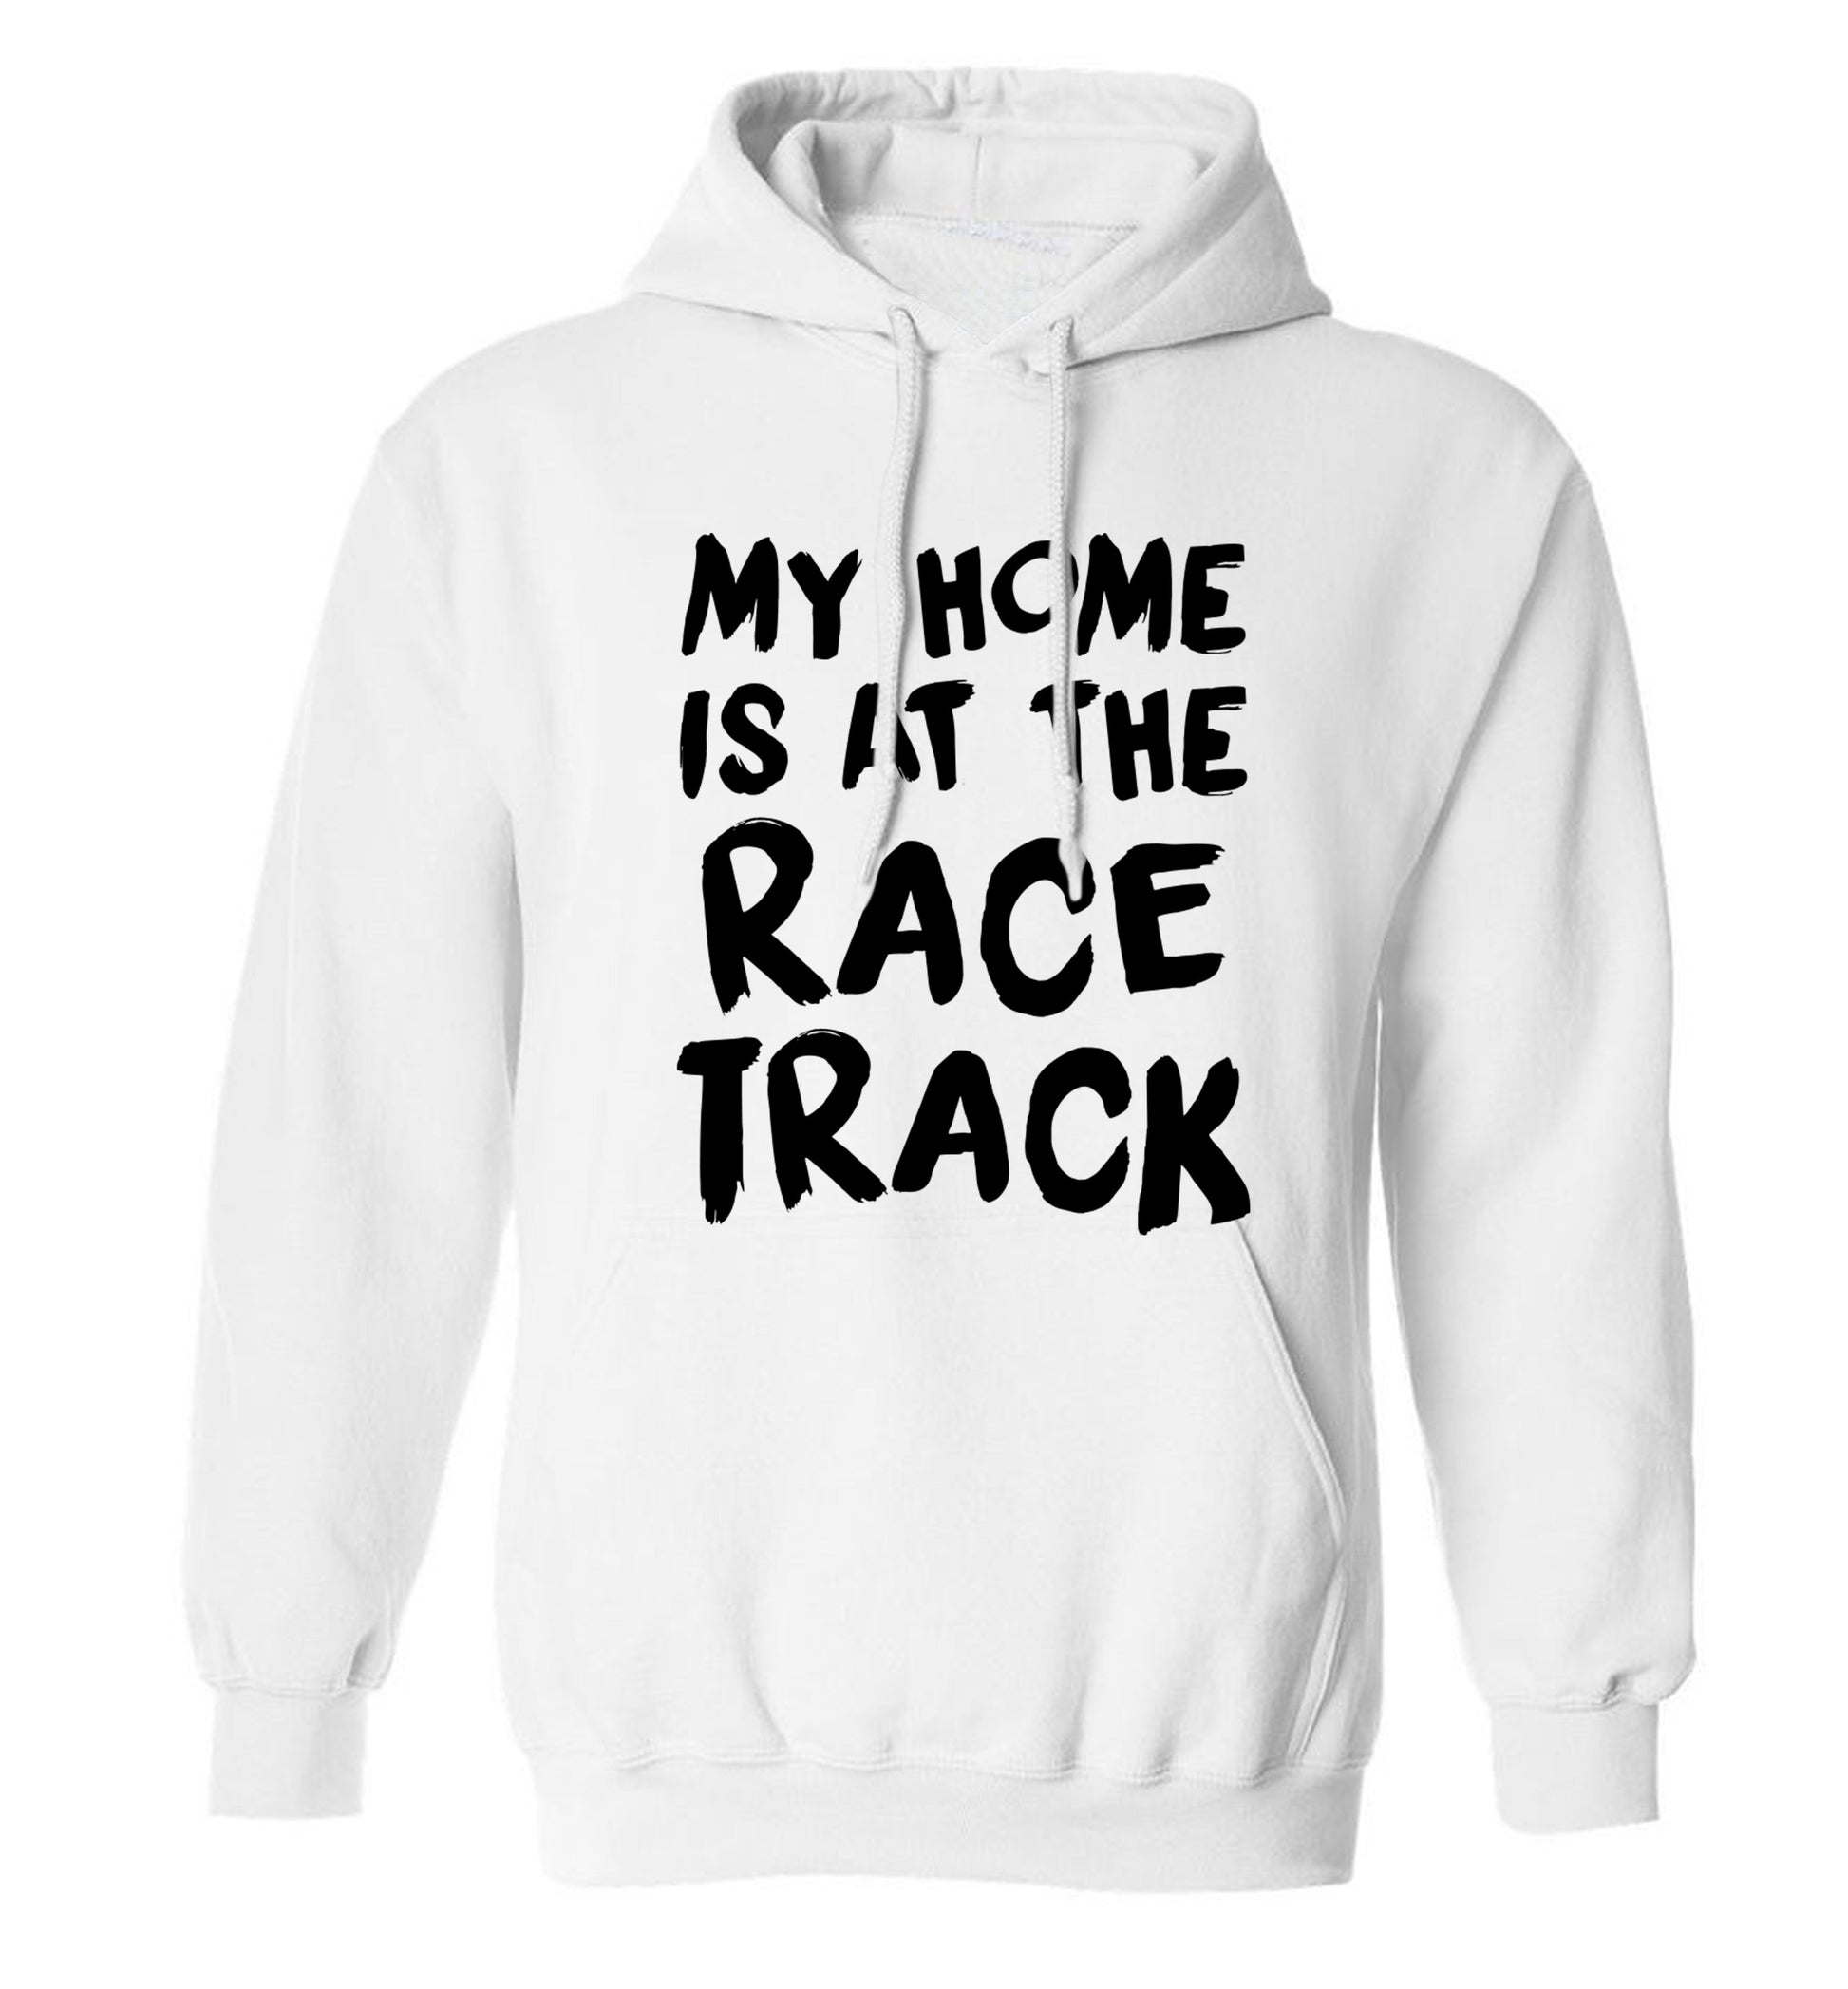 My home is at the race track adults unisex white hoodie 2XL